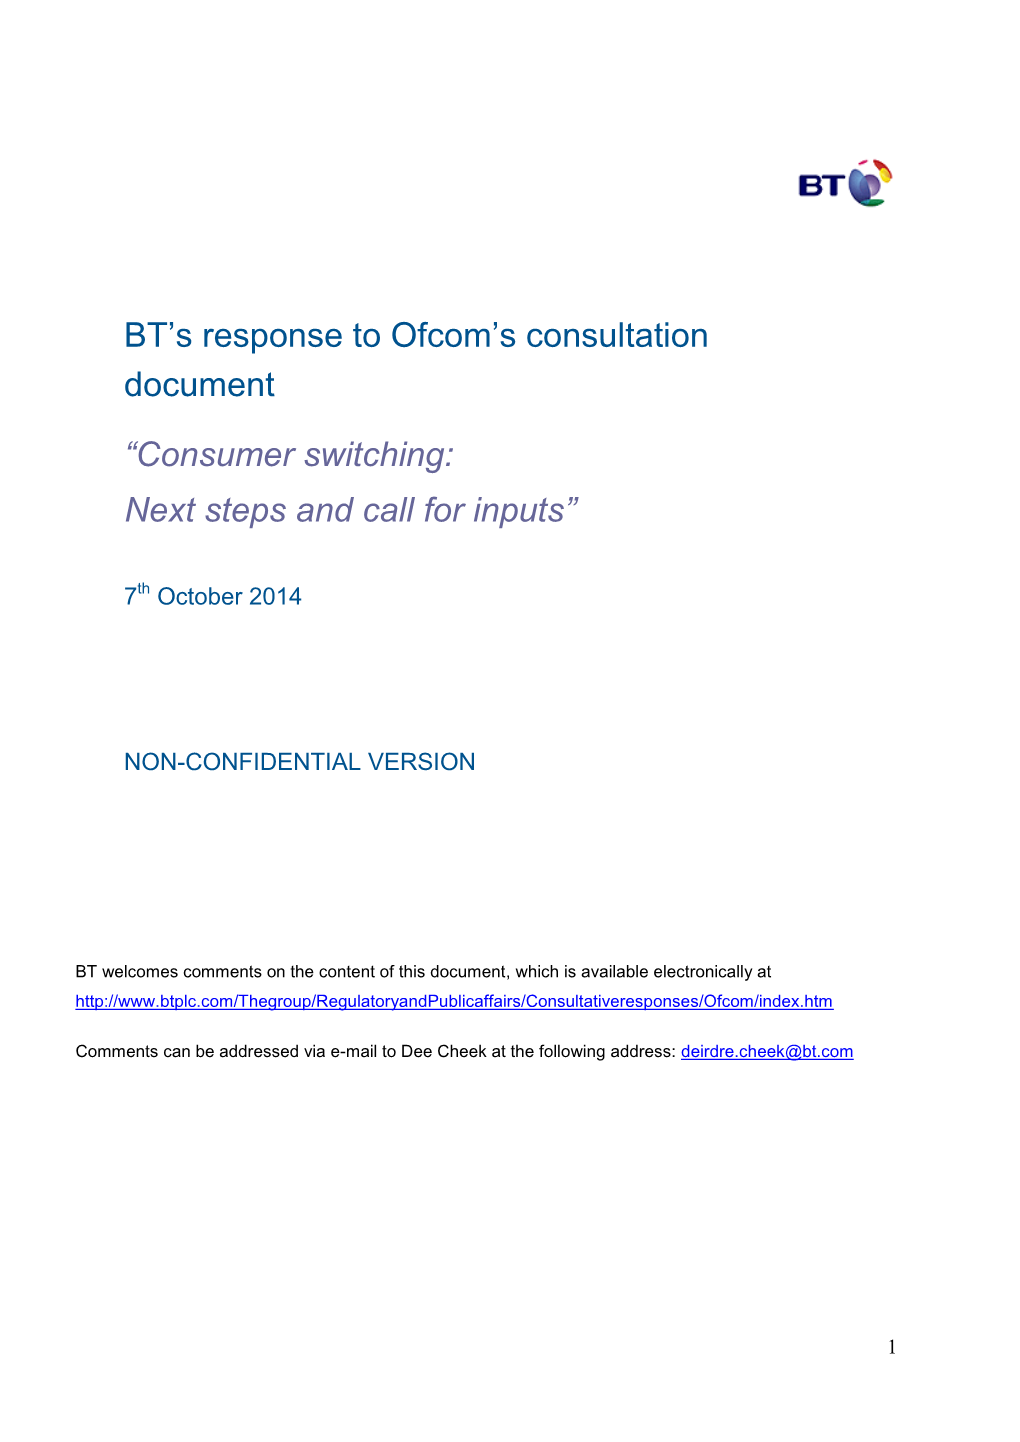 BT's Response to Ofcom's Consultation Document “Consumer Switching